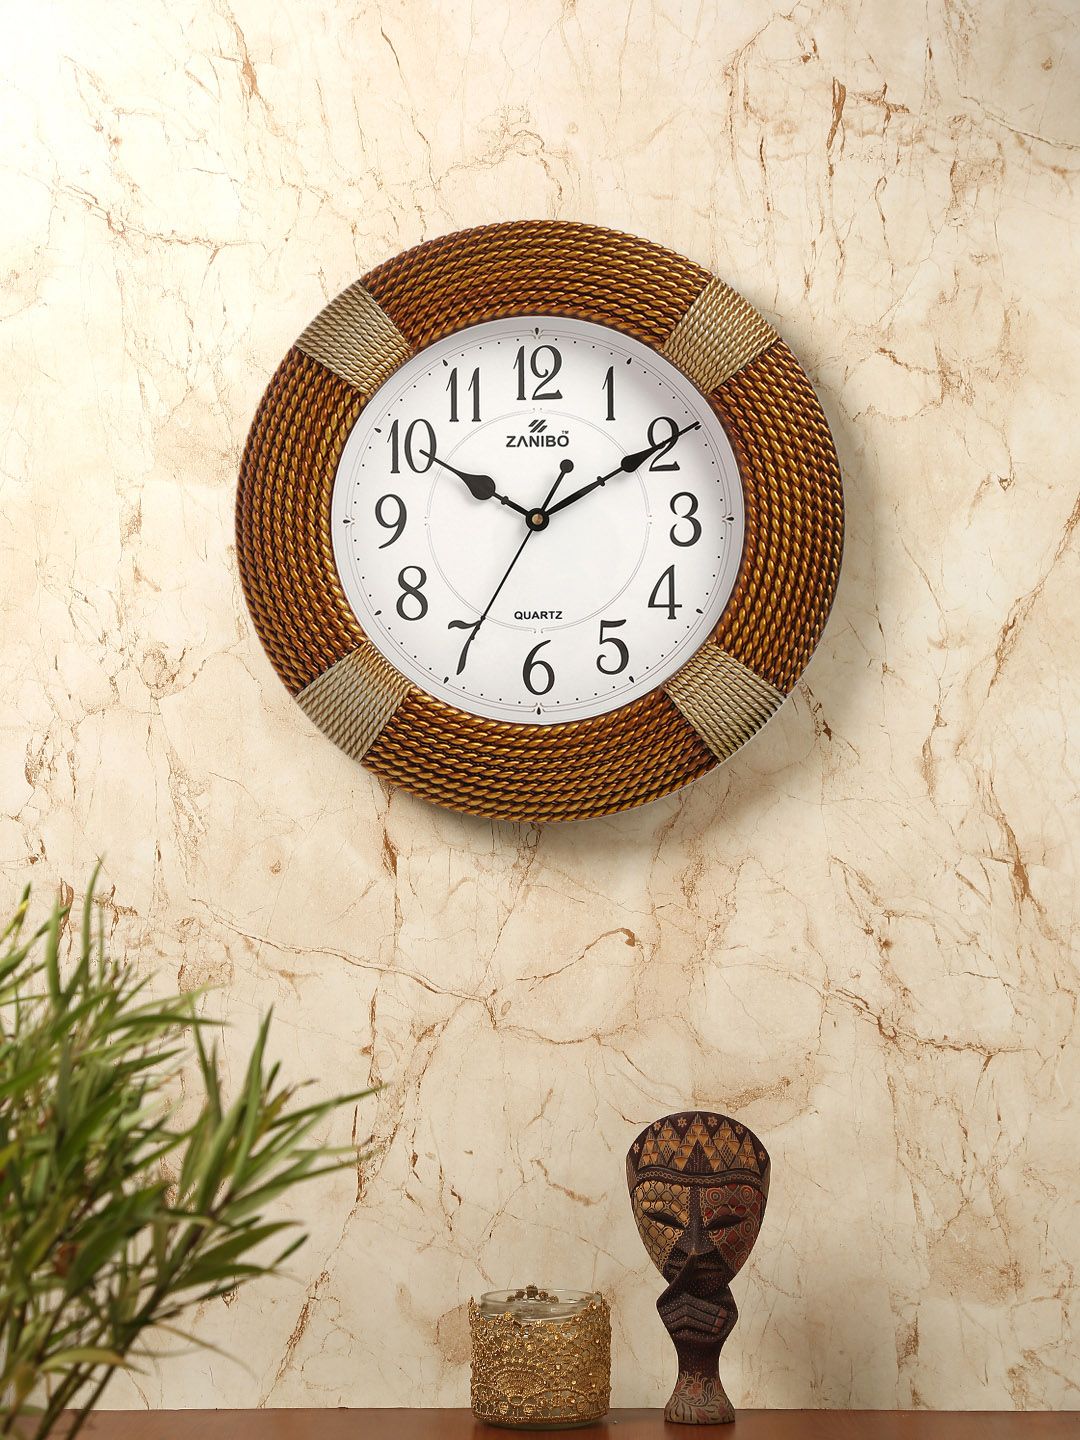 ZANIBO White & Tan Brown Round Solid Analogue Wall Clock Price in India